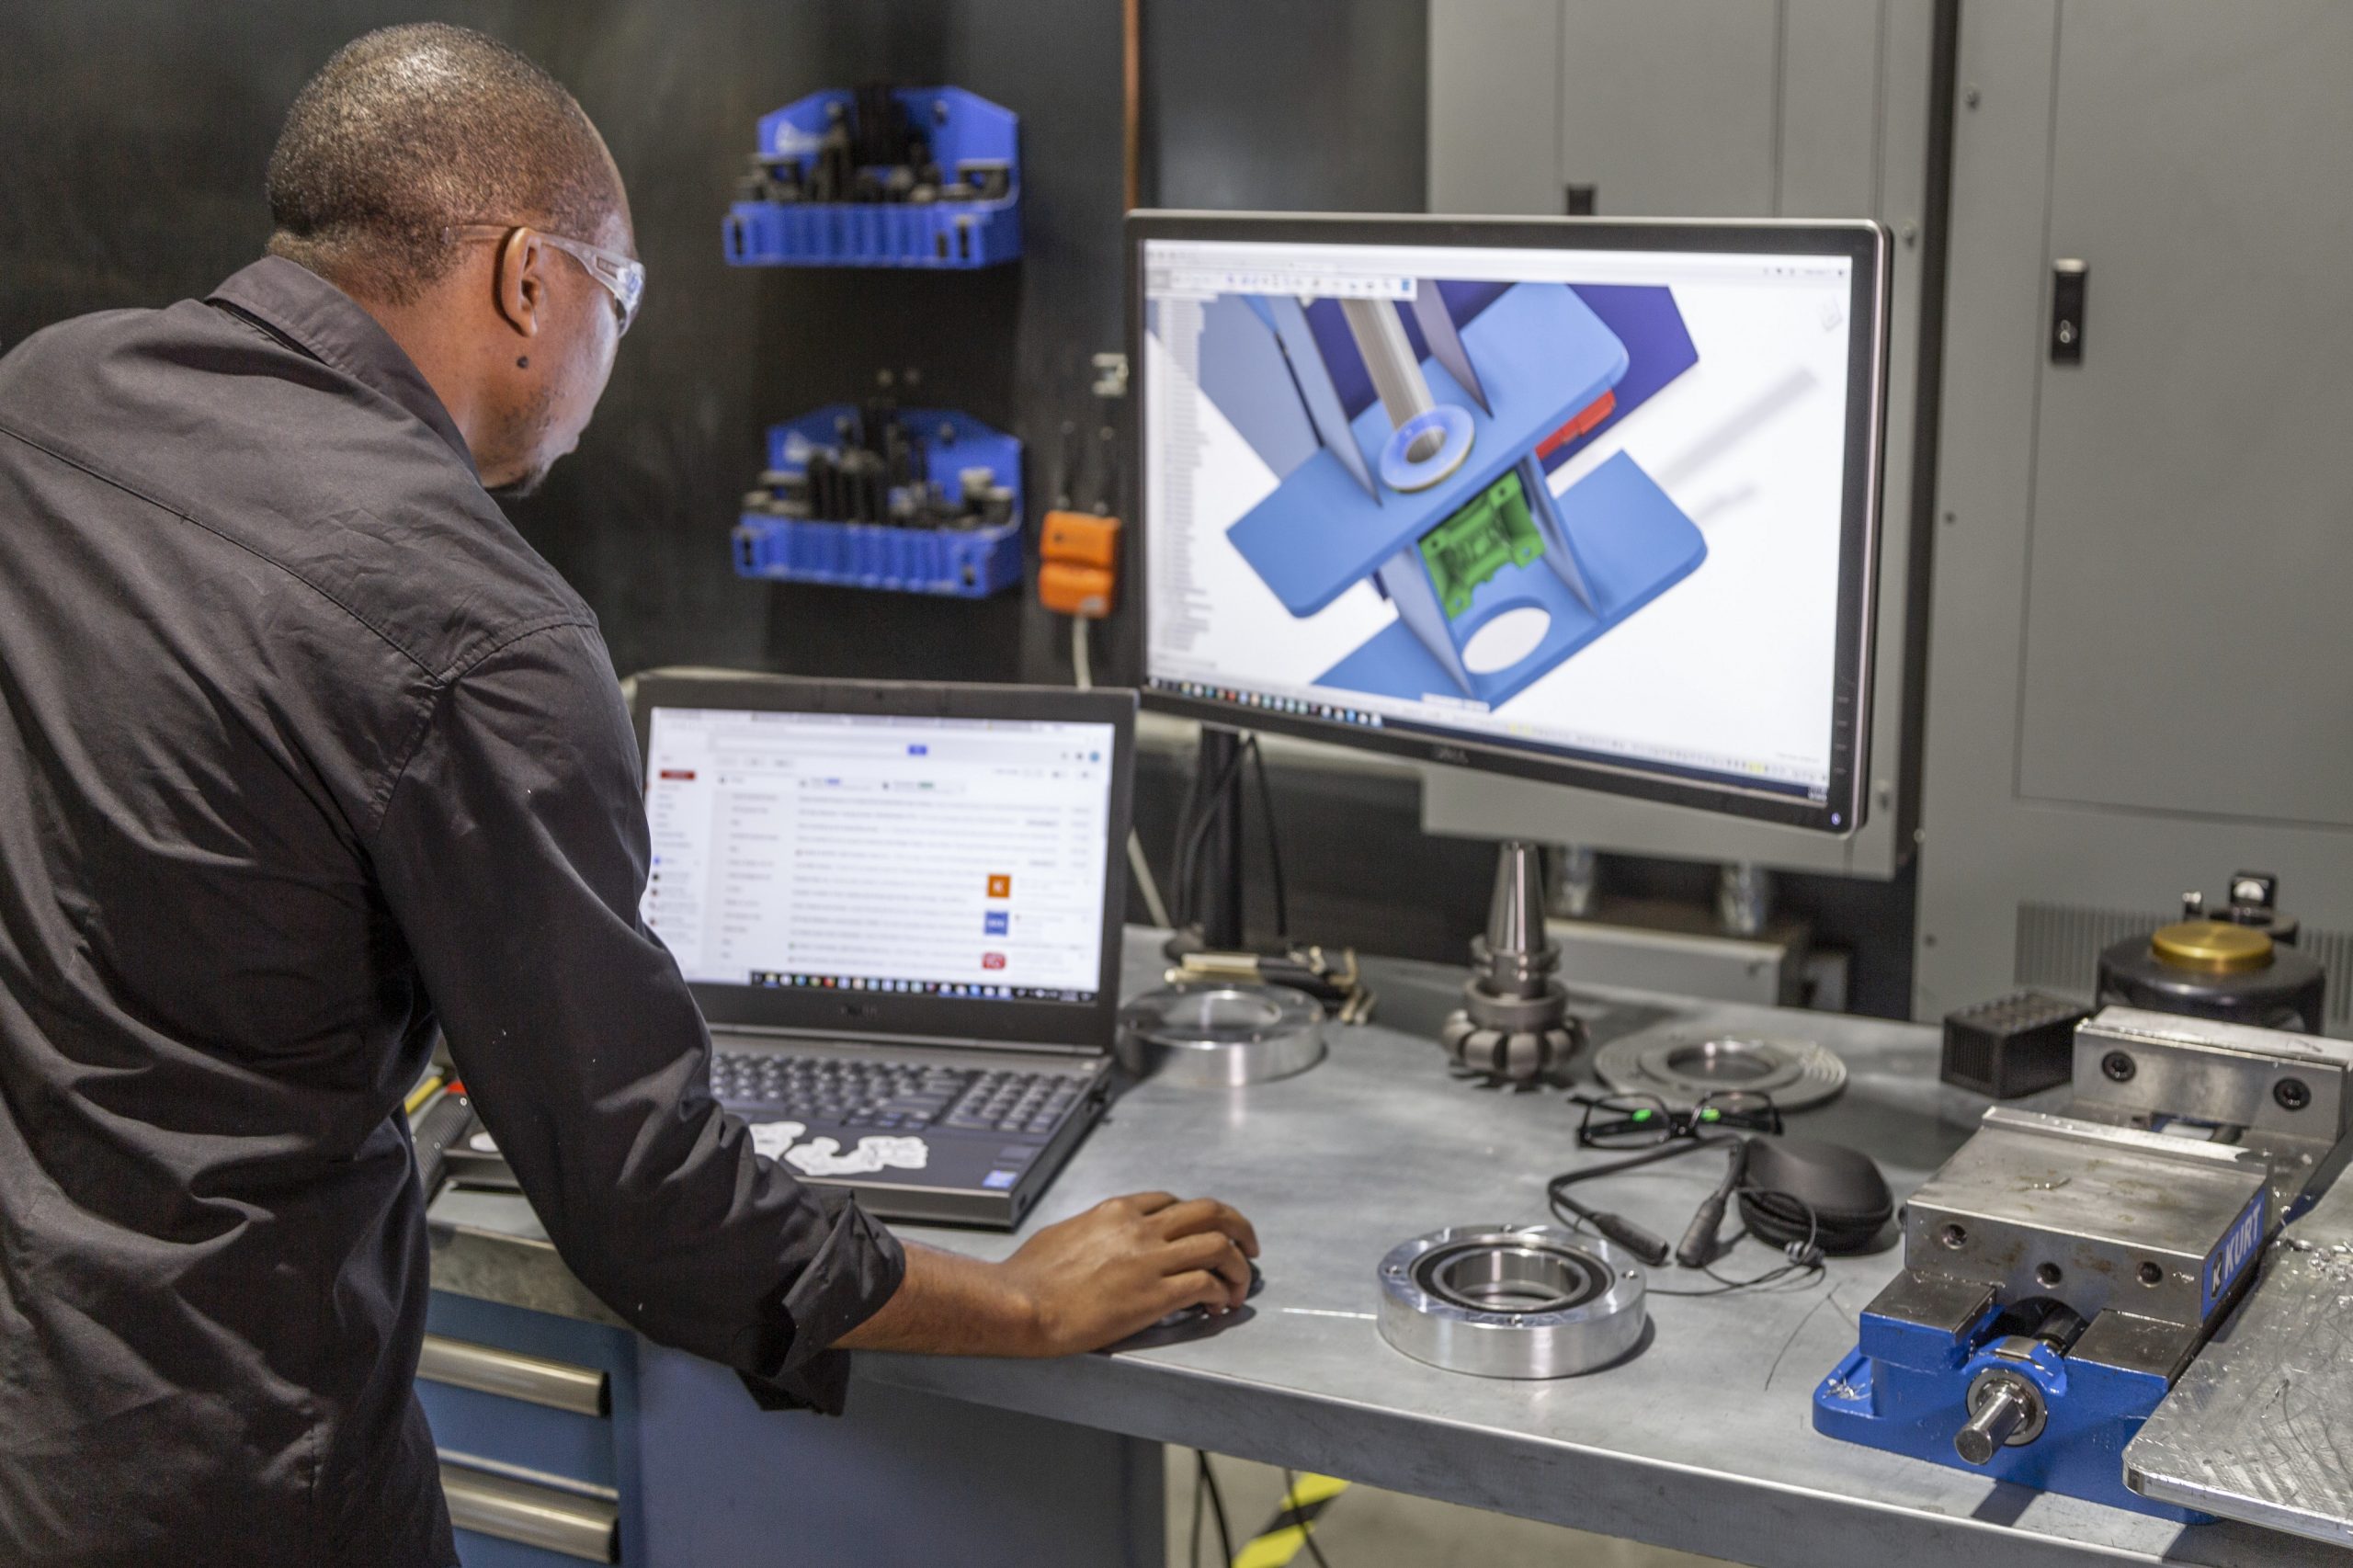 An engineer using Autodesk's Fusion 360 software.